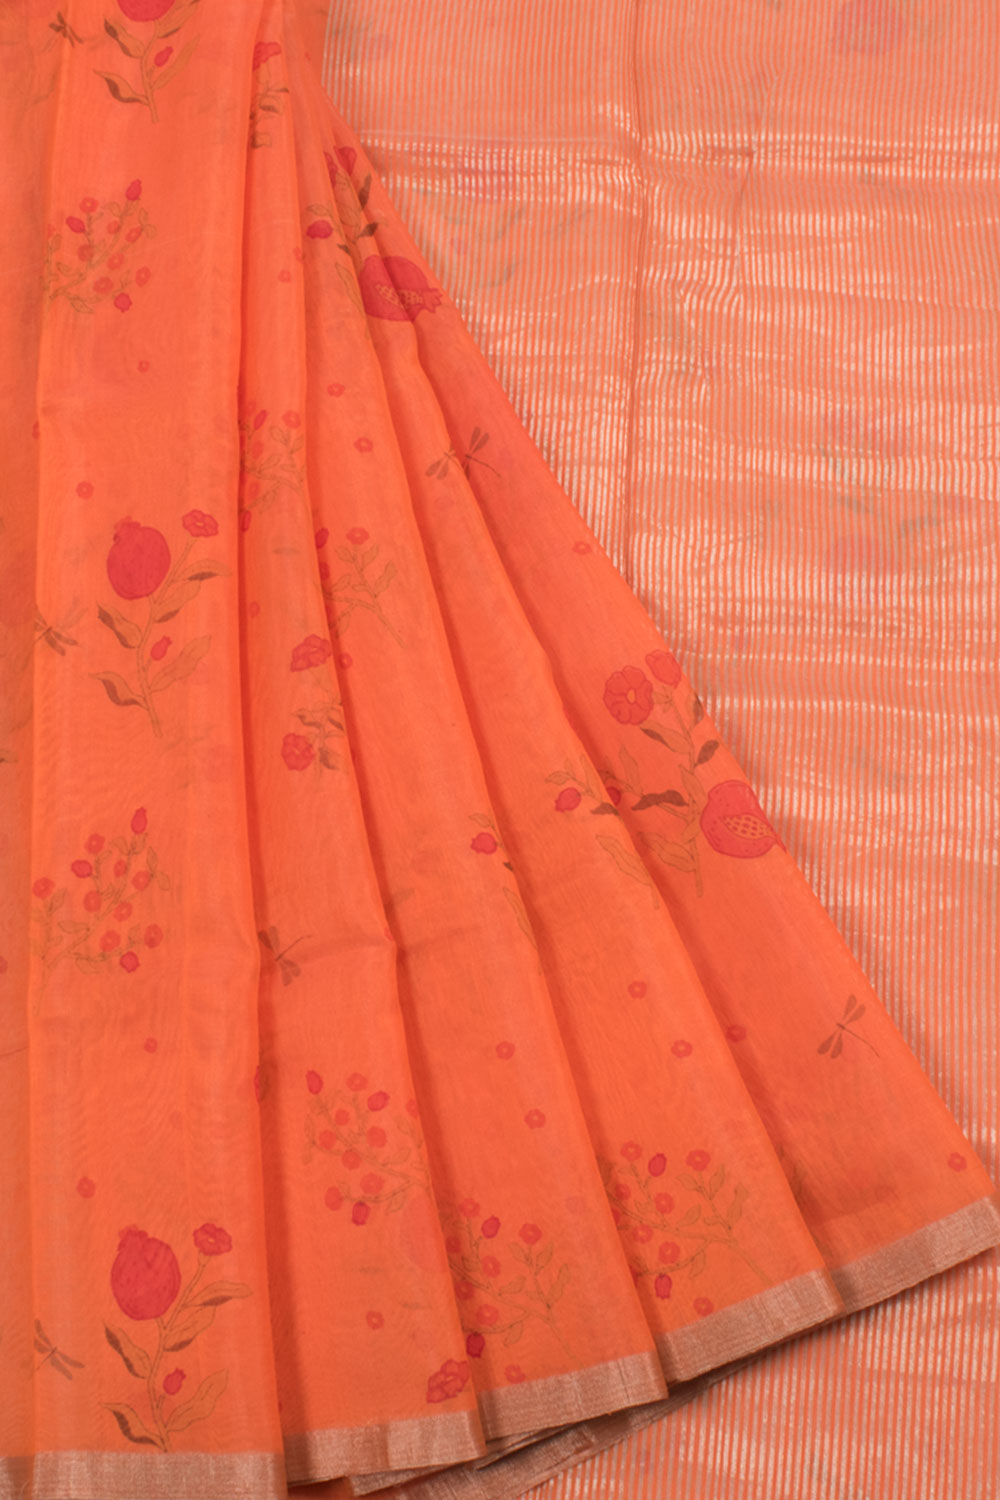 Printed Chanderi Silk Cotton Saree with Dragonfly and Floral Motifs 